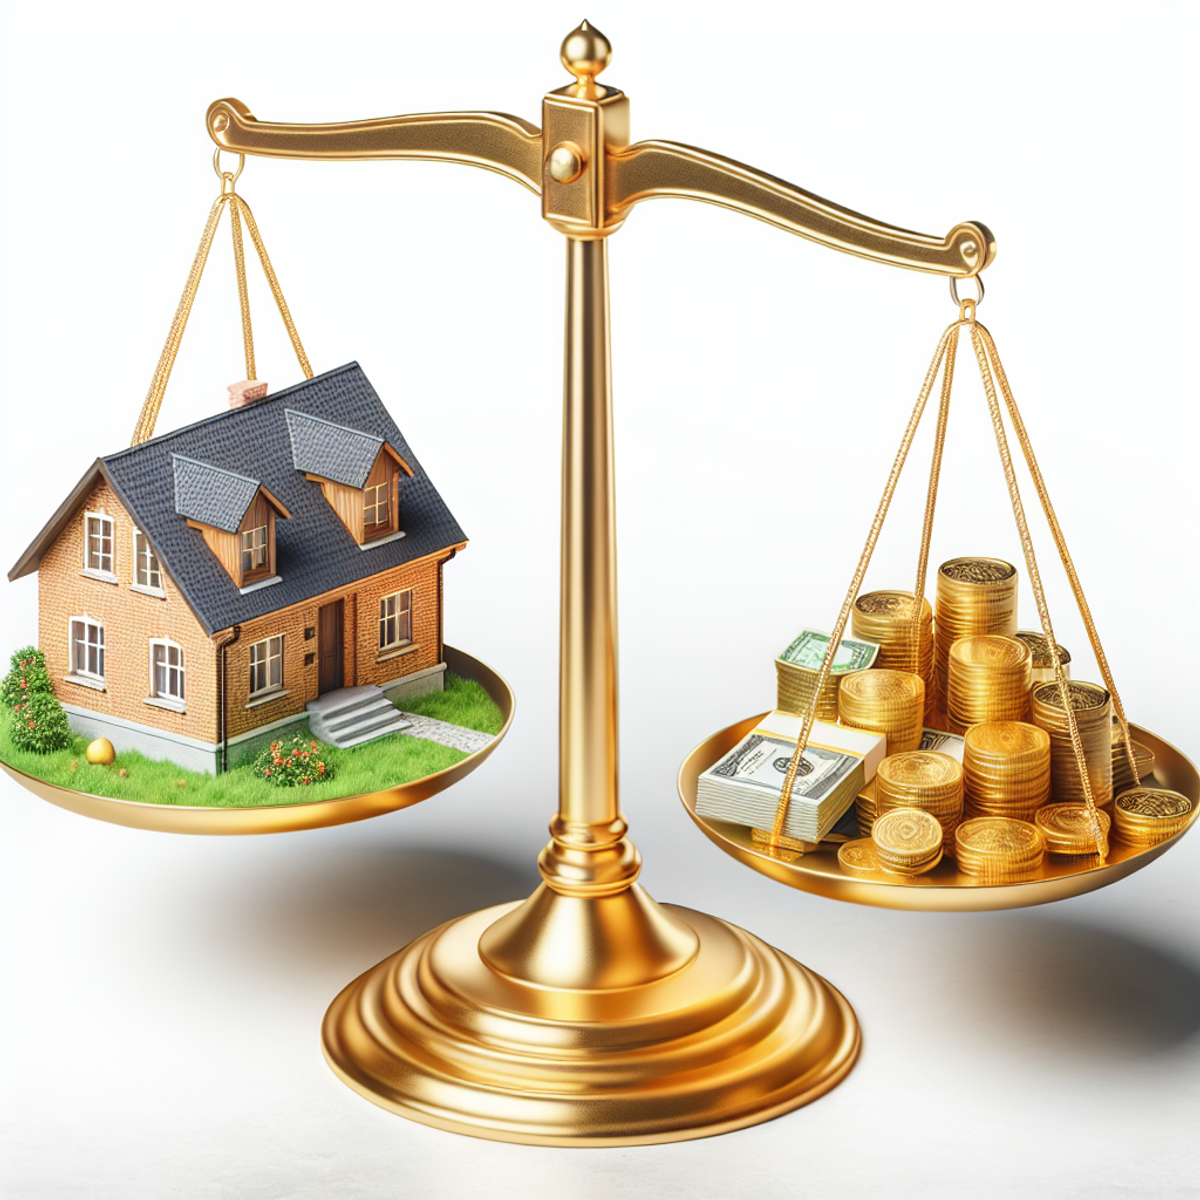 A golden scale with a house on one side and money on the other, balanced equally.